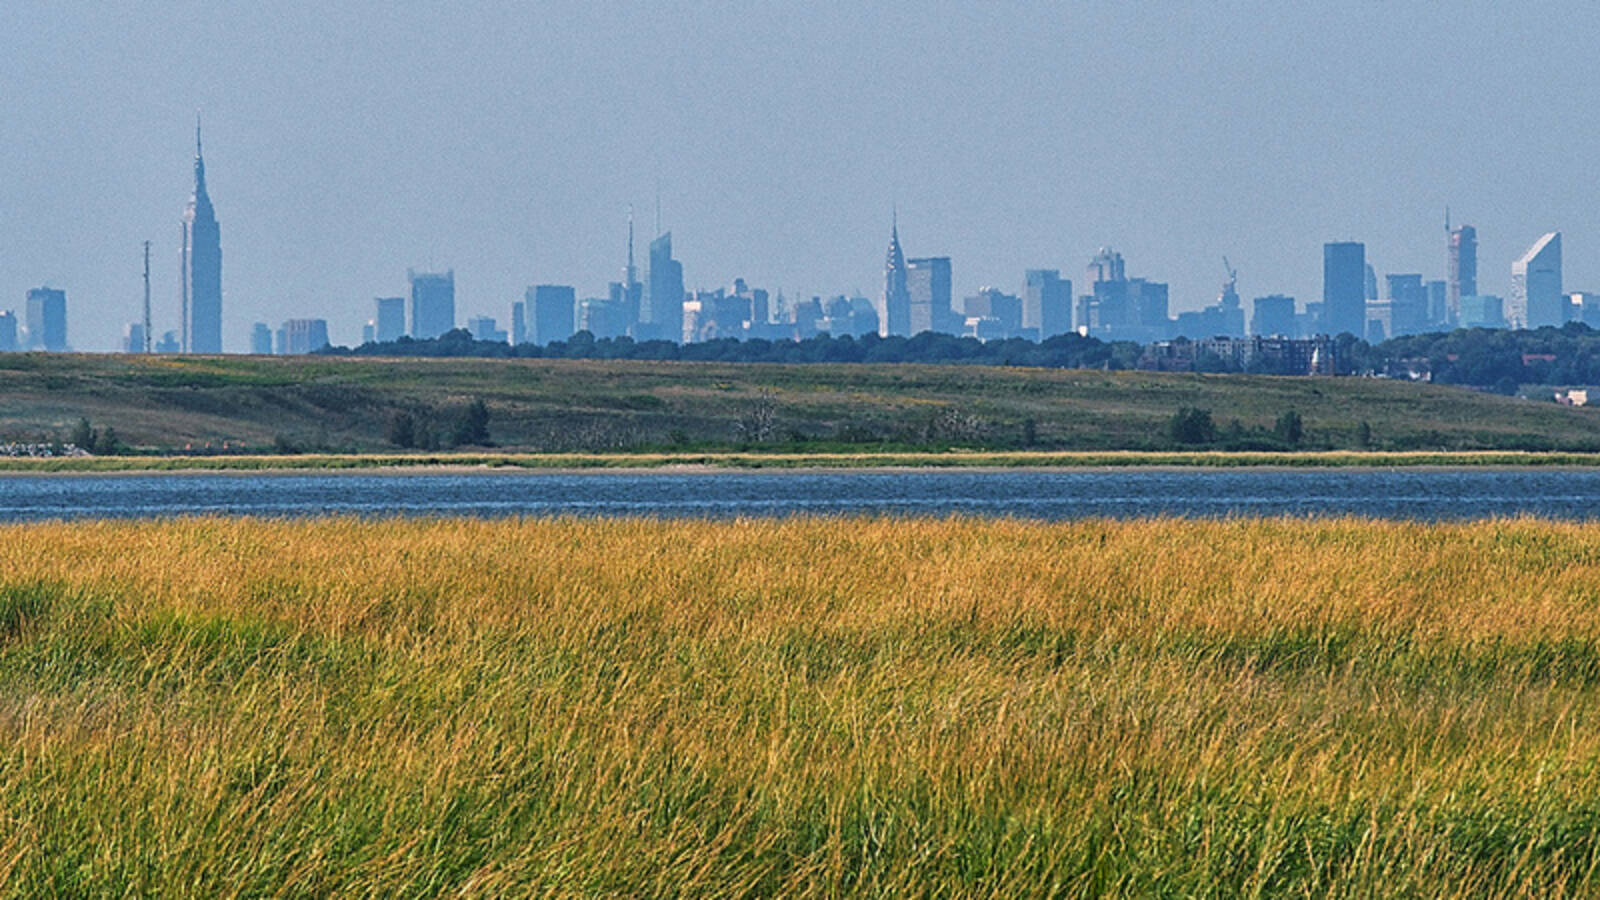 <p> Jamaica Bay salt marshes, with the NYC skyline in the background</p>